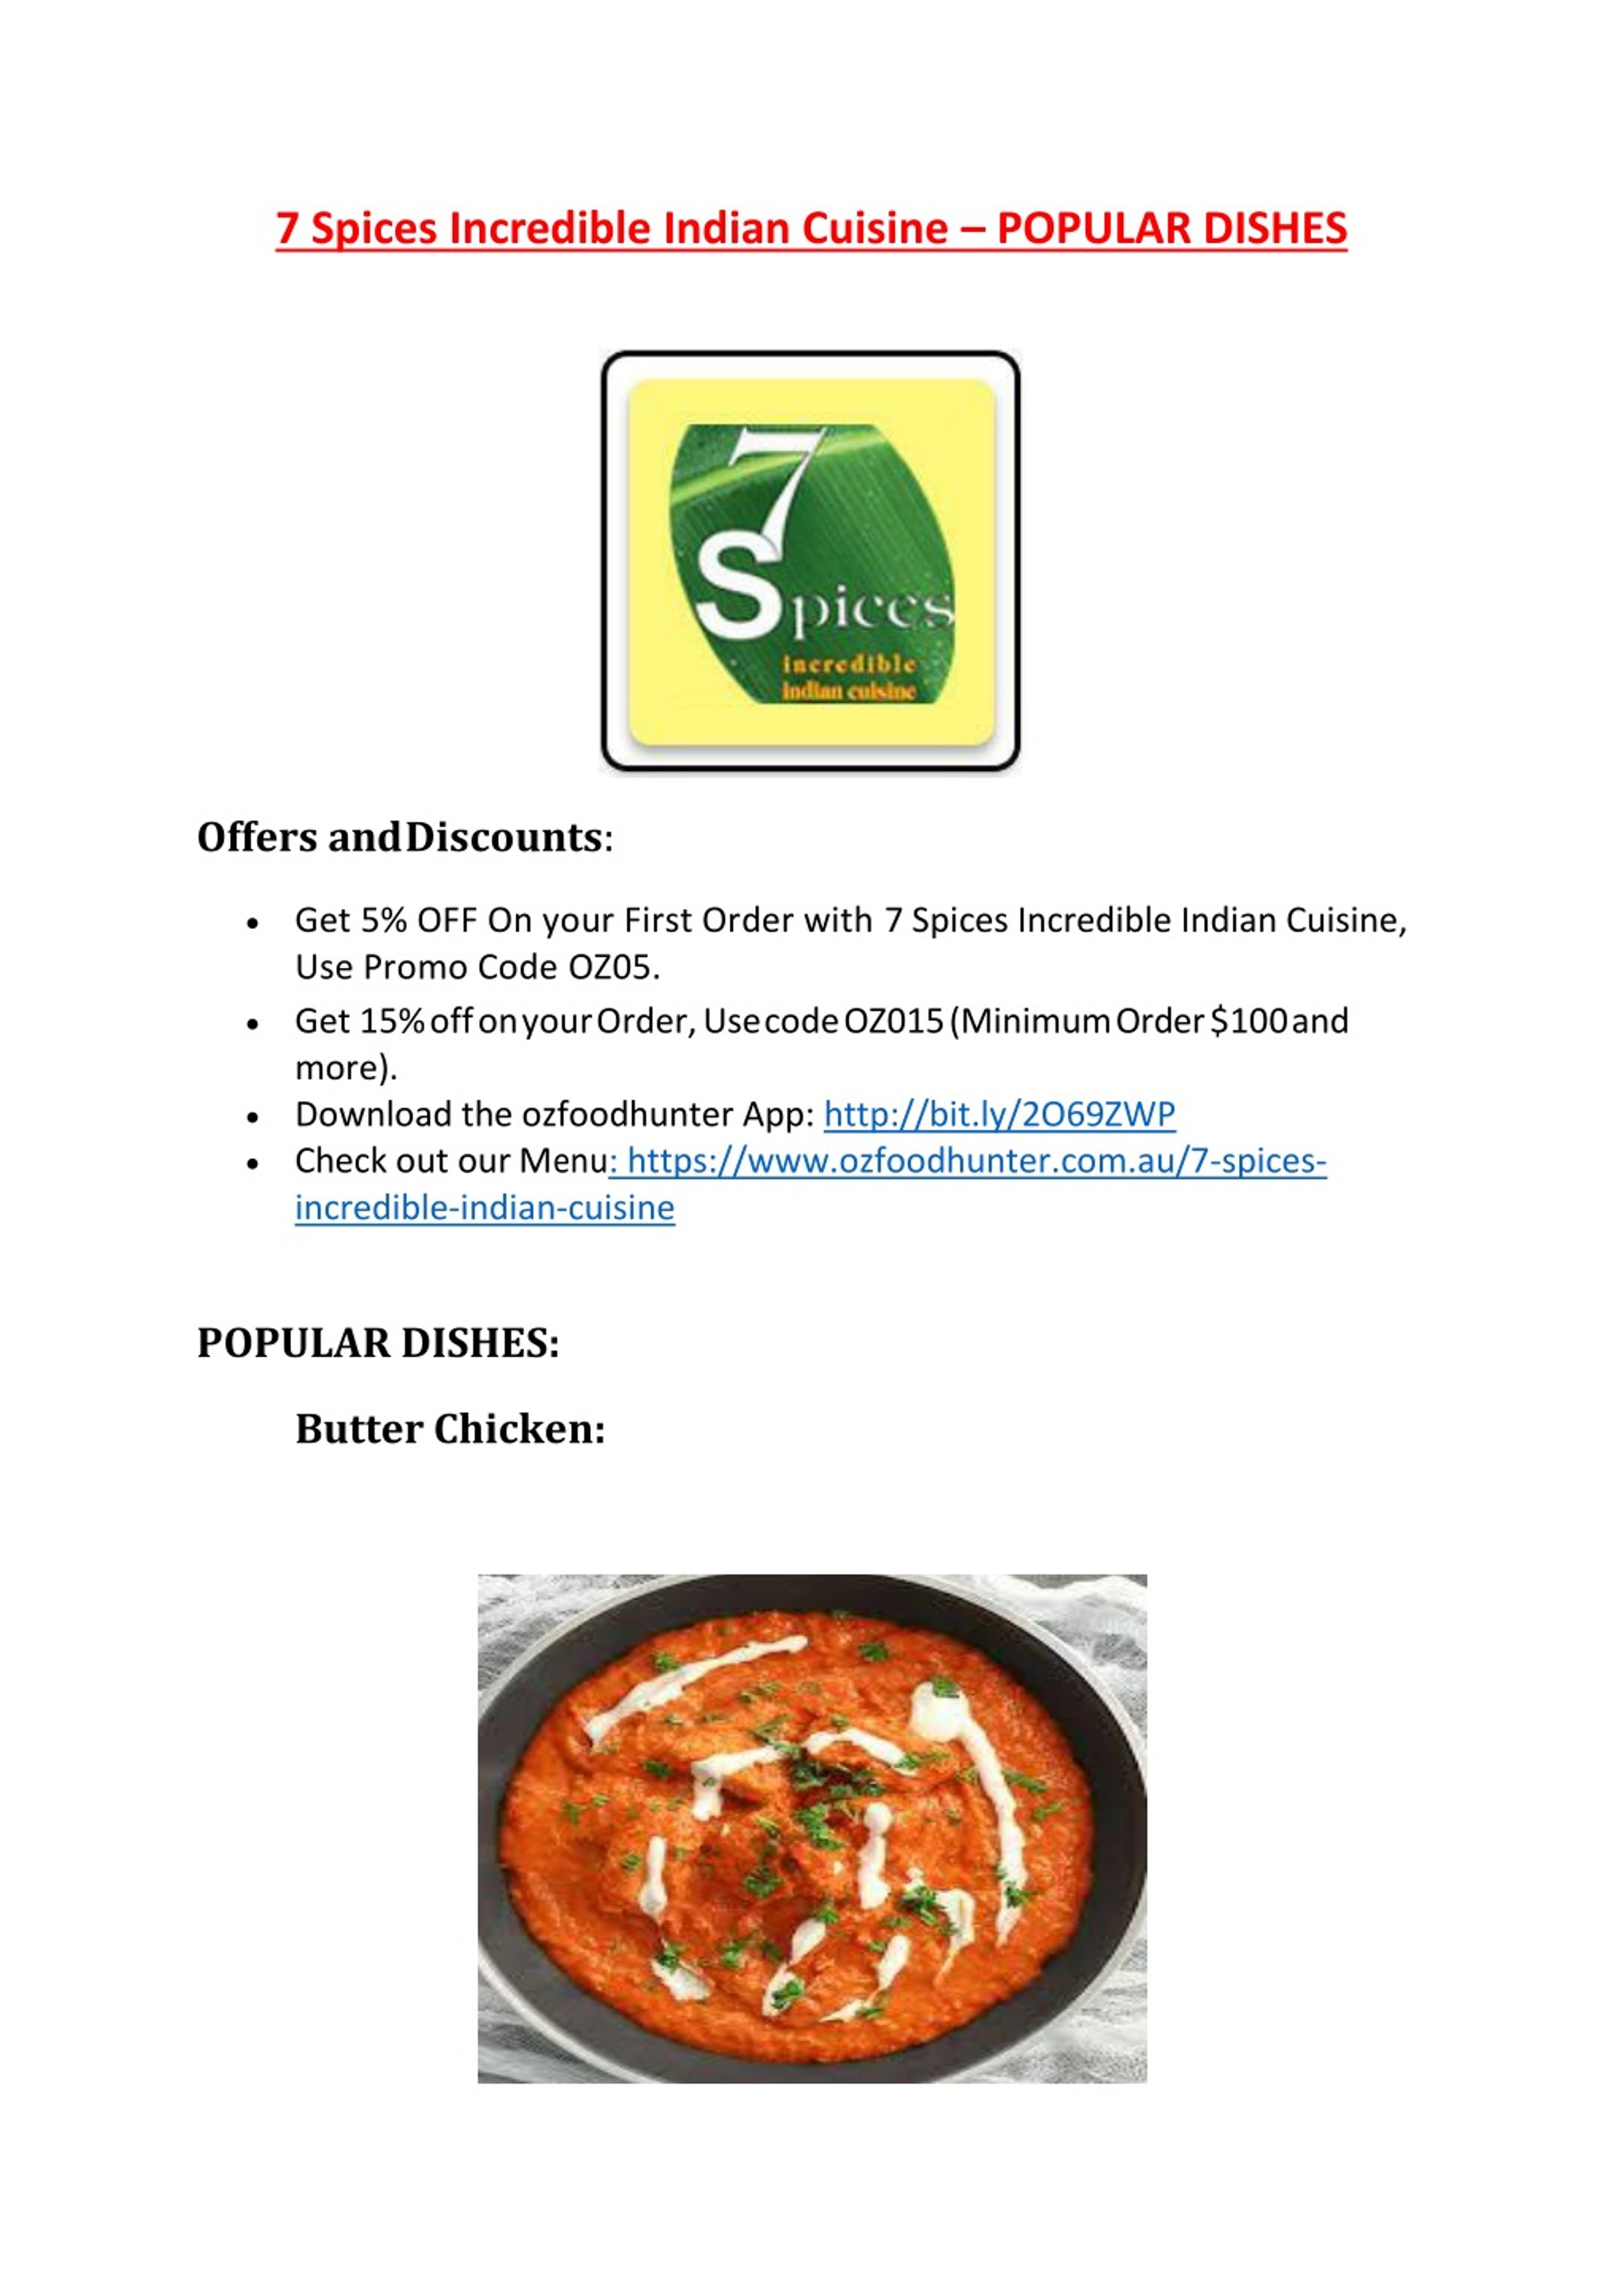 PPT - 15% Off - 7 Spices Incredible Indian Cuisine-Applecross - Order ...